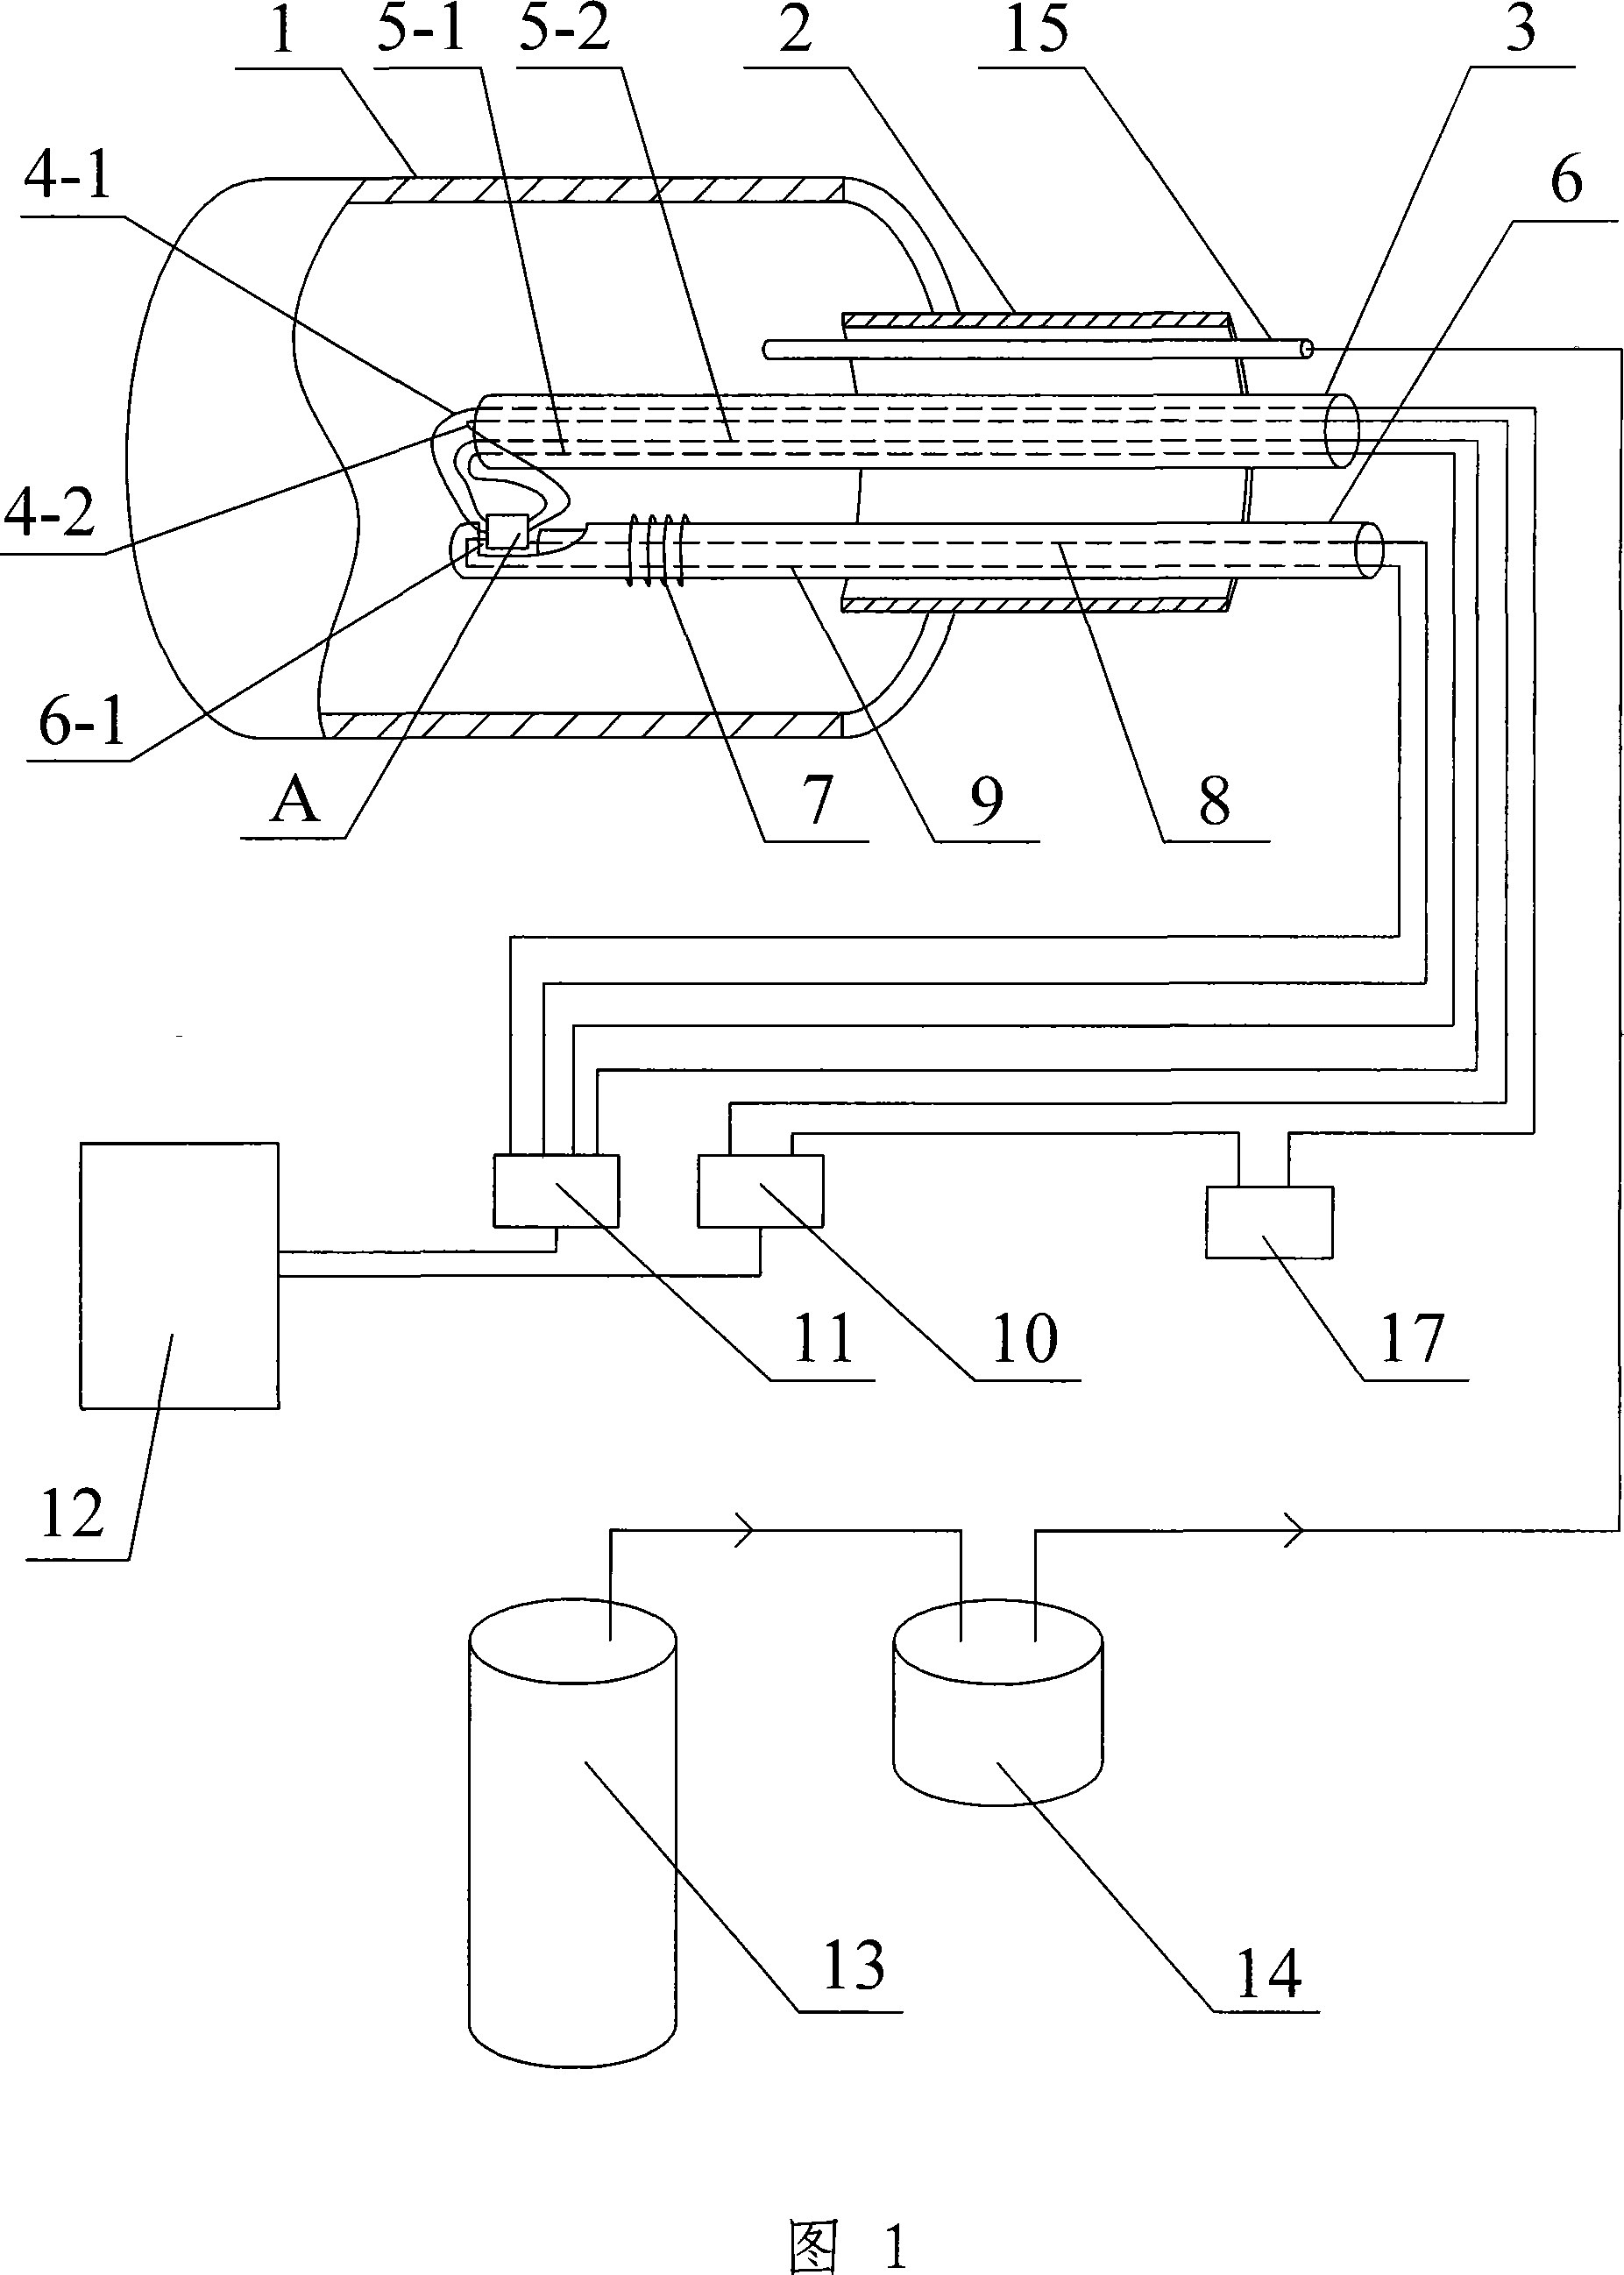 Semi-conducting material thermoelectricity performance test system